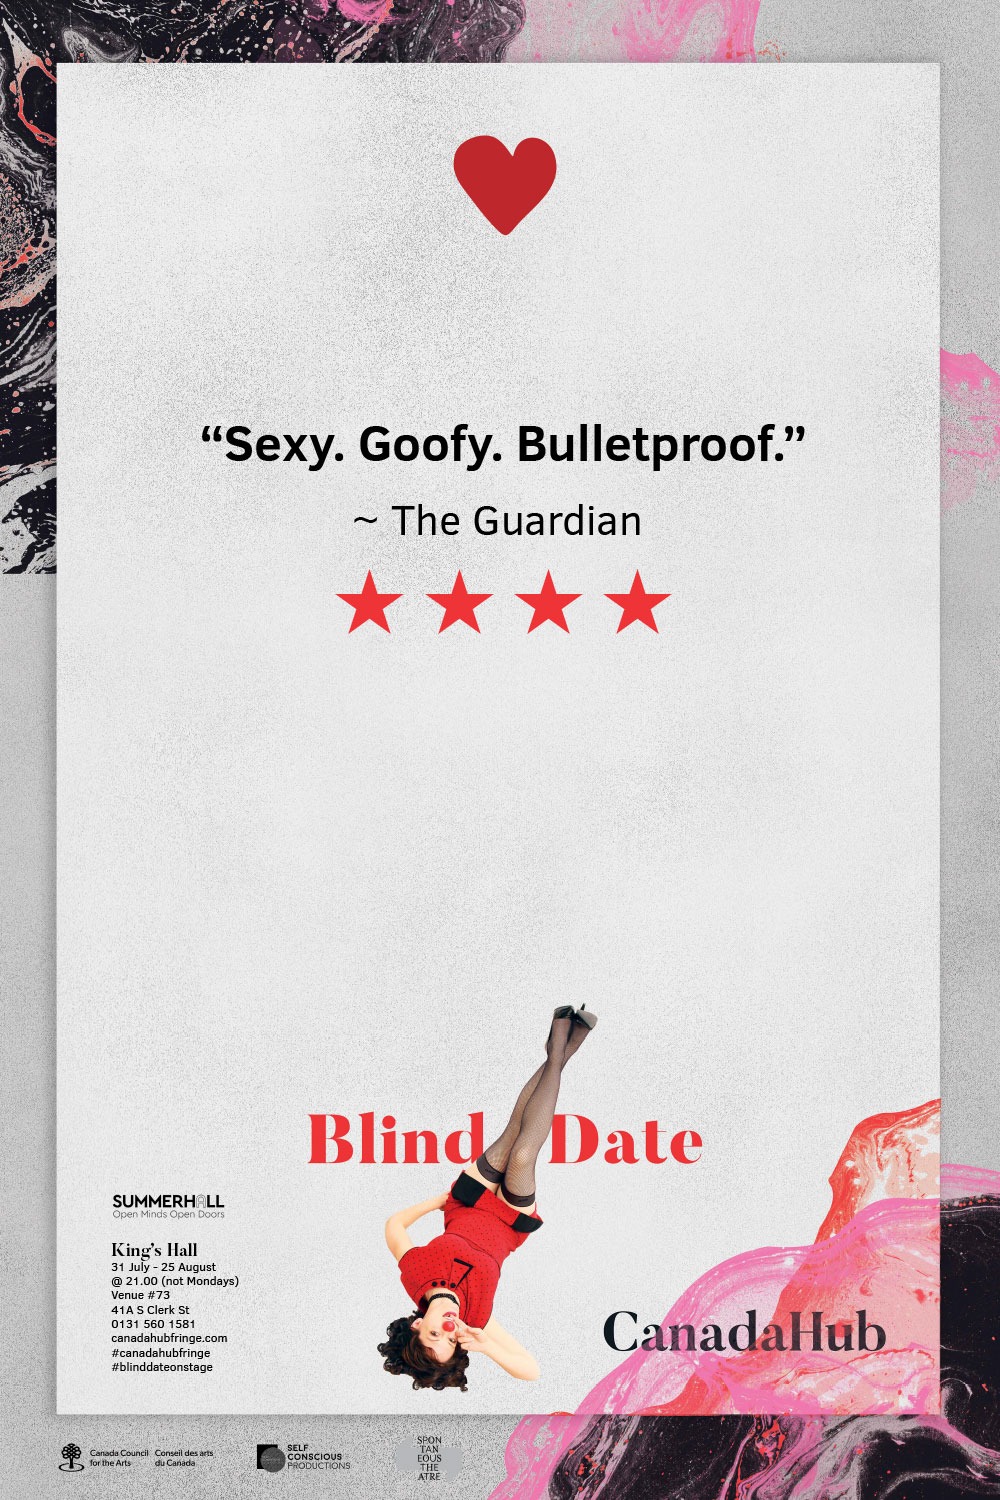 The poster for Blind Date